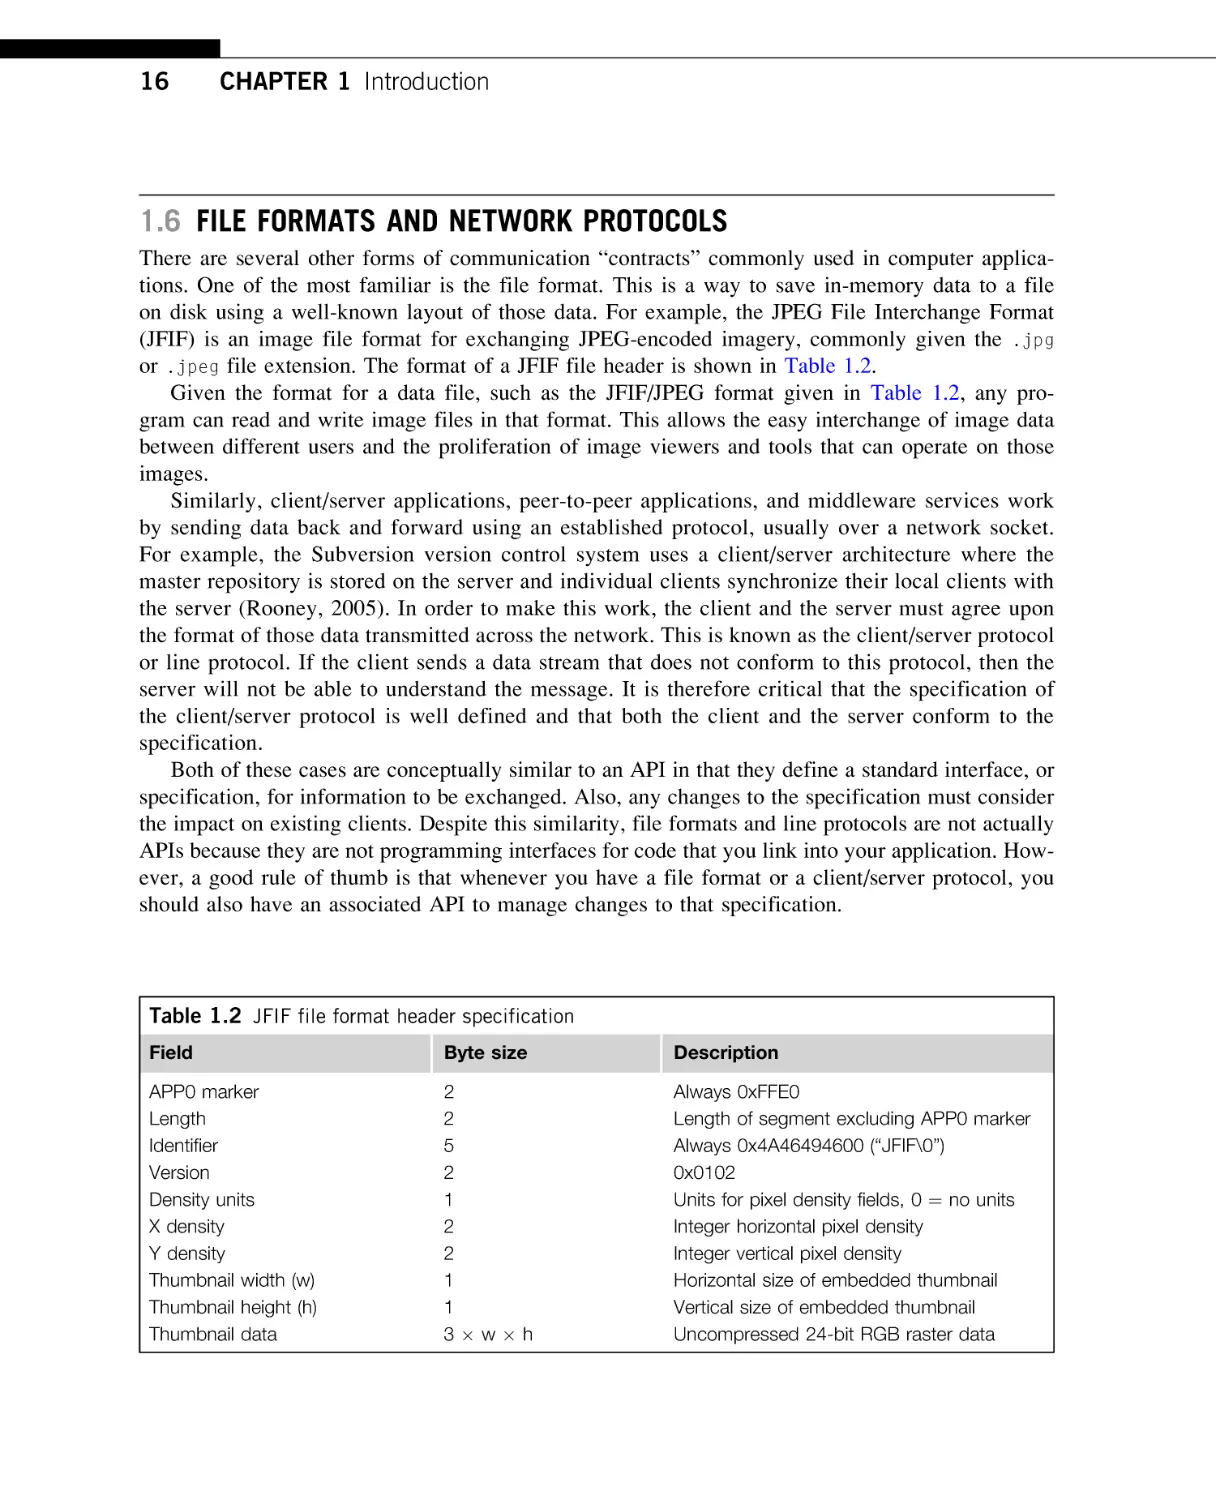 File Formats and Network Protocols